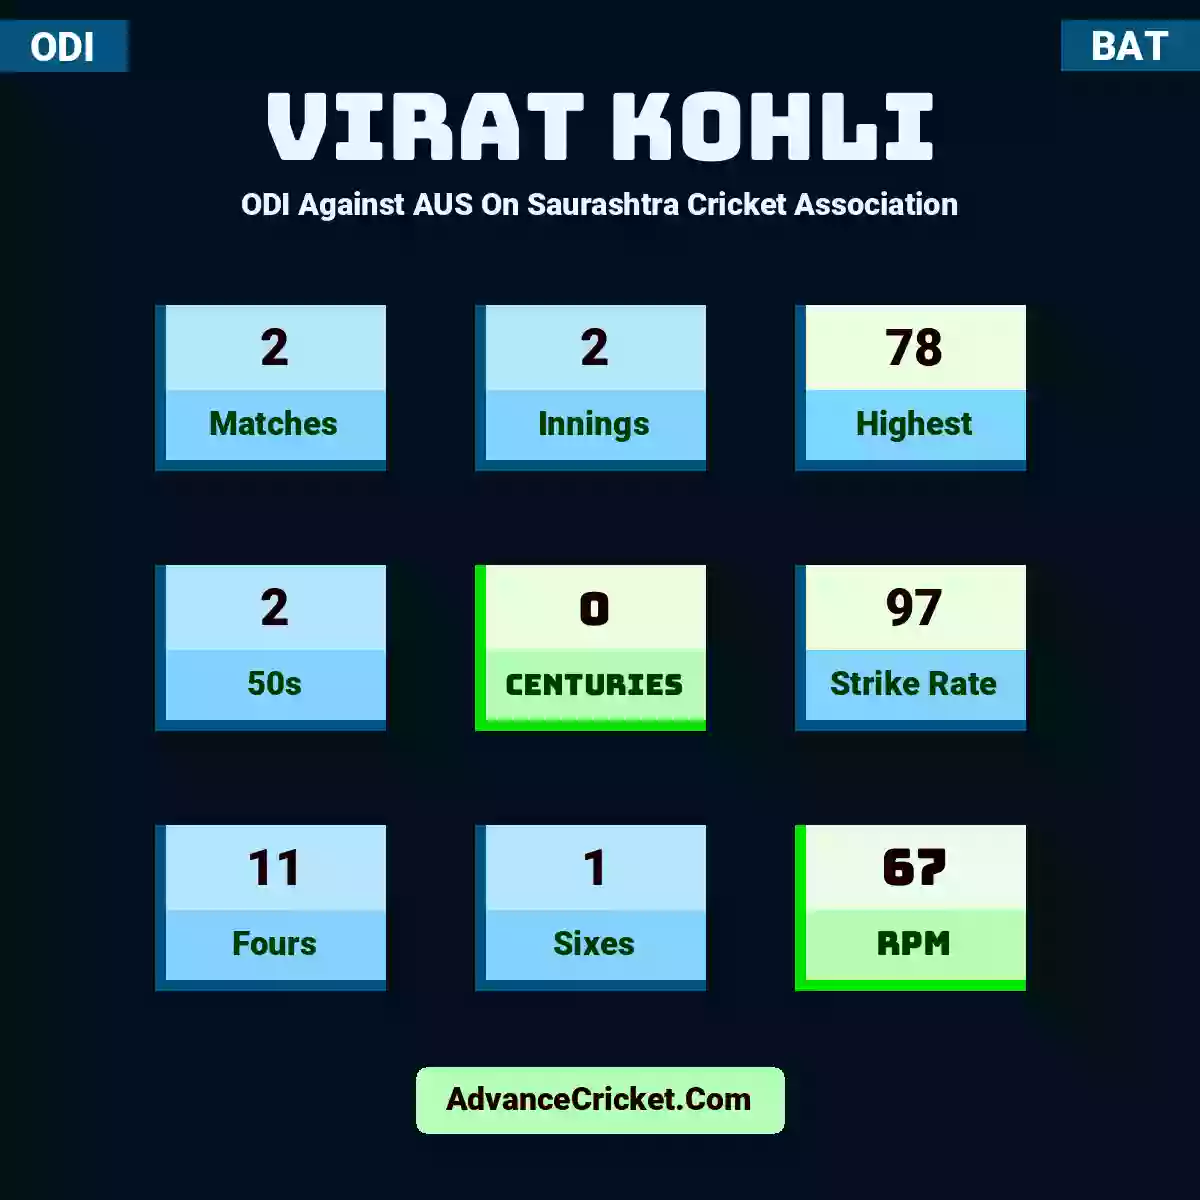 Virat Kohli ODI  Against AUS On Saurashtra Cricket Association, Virat Kohli played 2 matches, scored 78 runs as highest, 2 half-centuries, and 0 centuries, with a strike rate of 97. V.Kohli hit 11 fours and 1 sixes, with an RPM of 67.